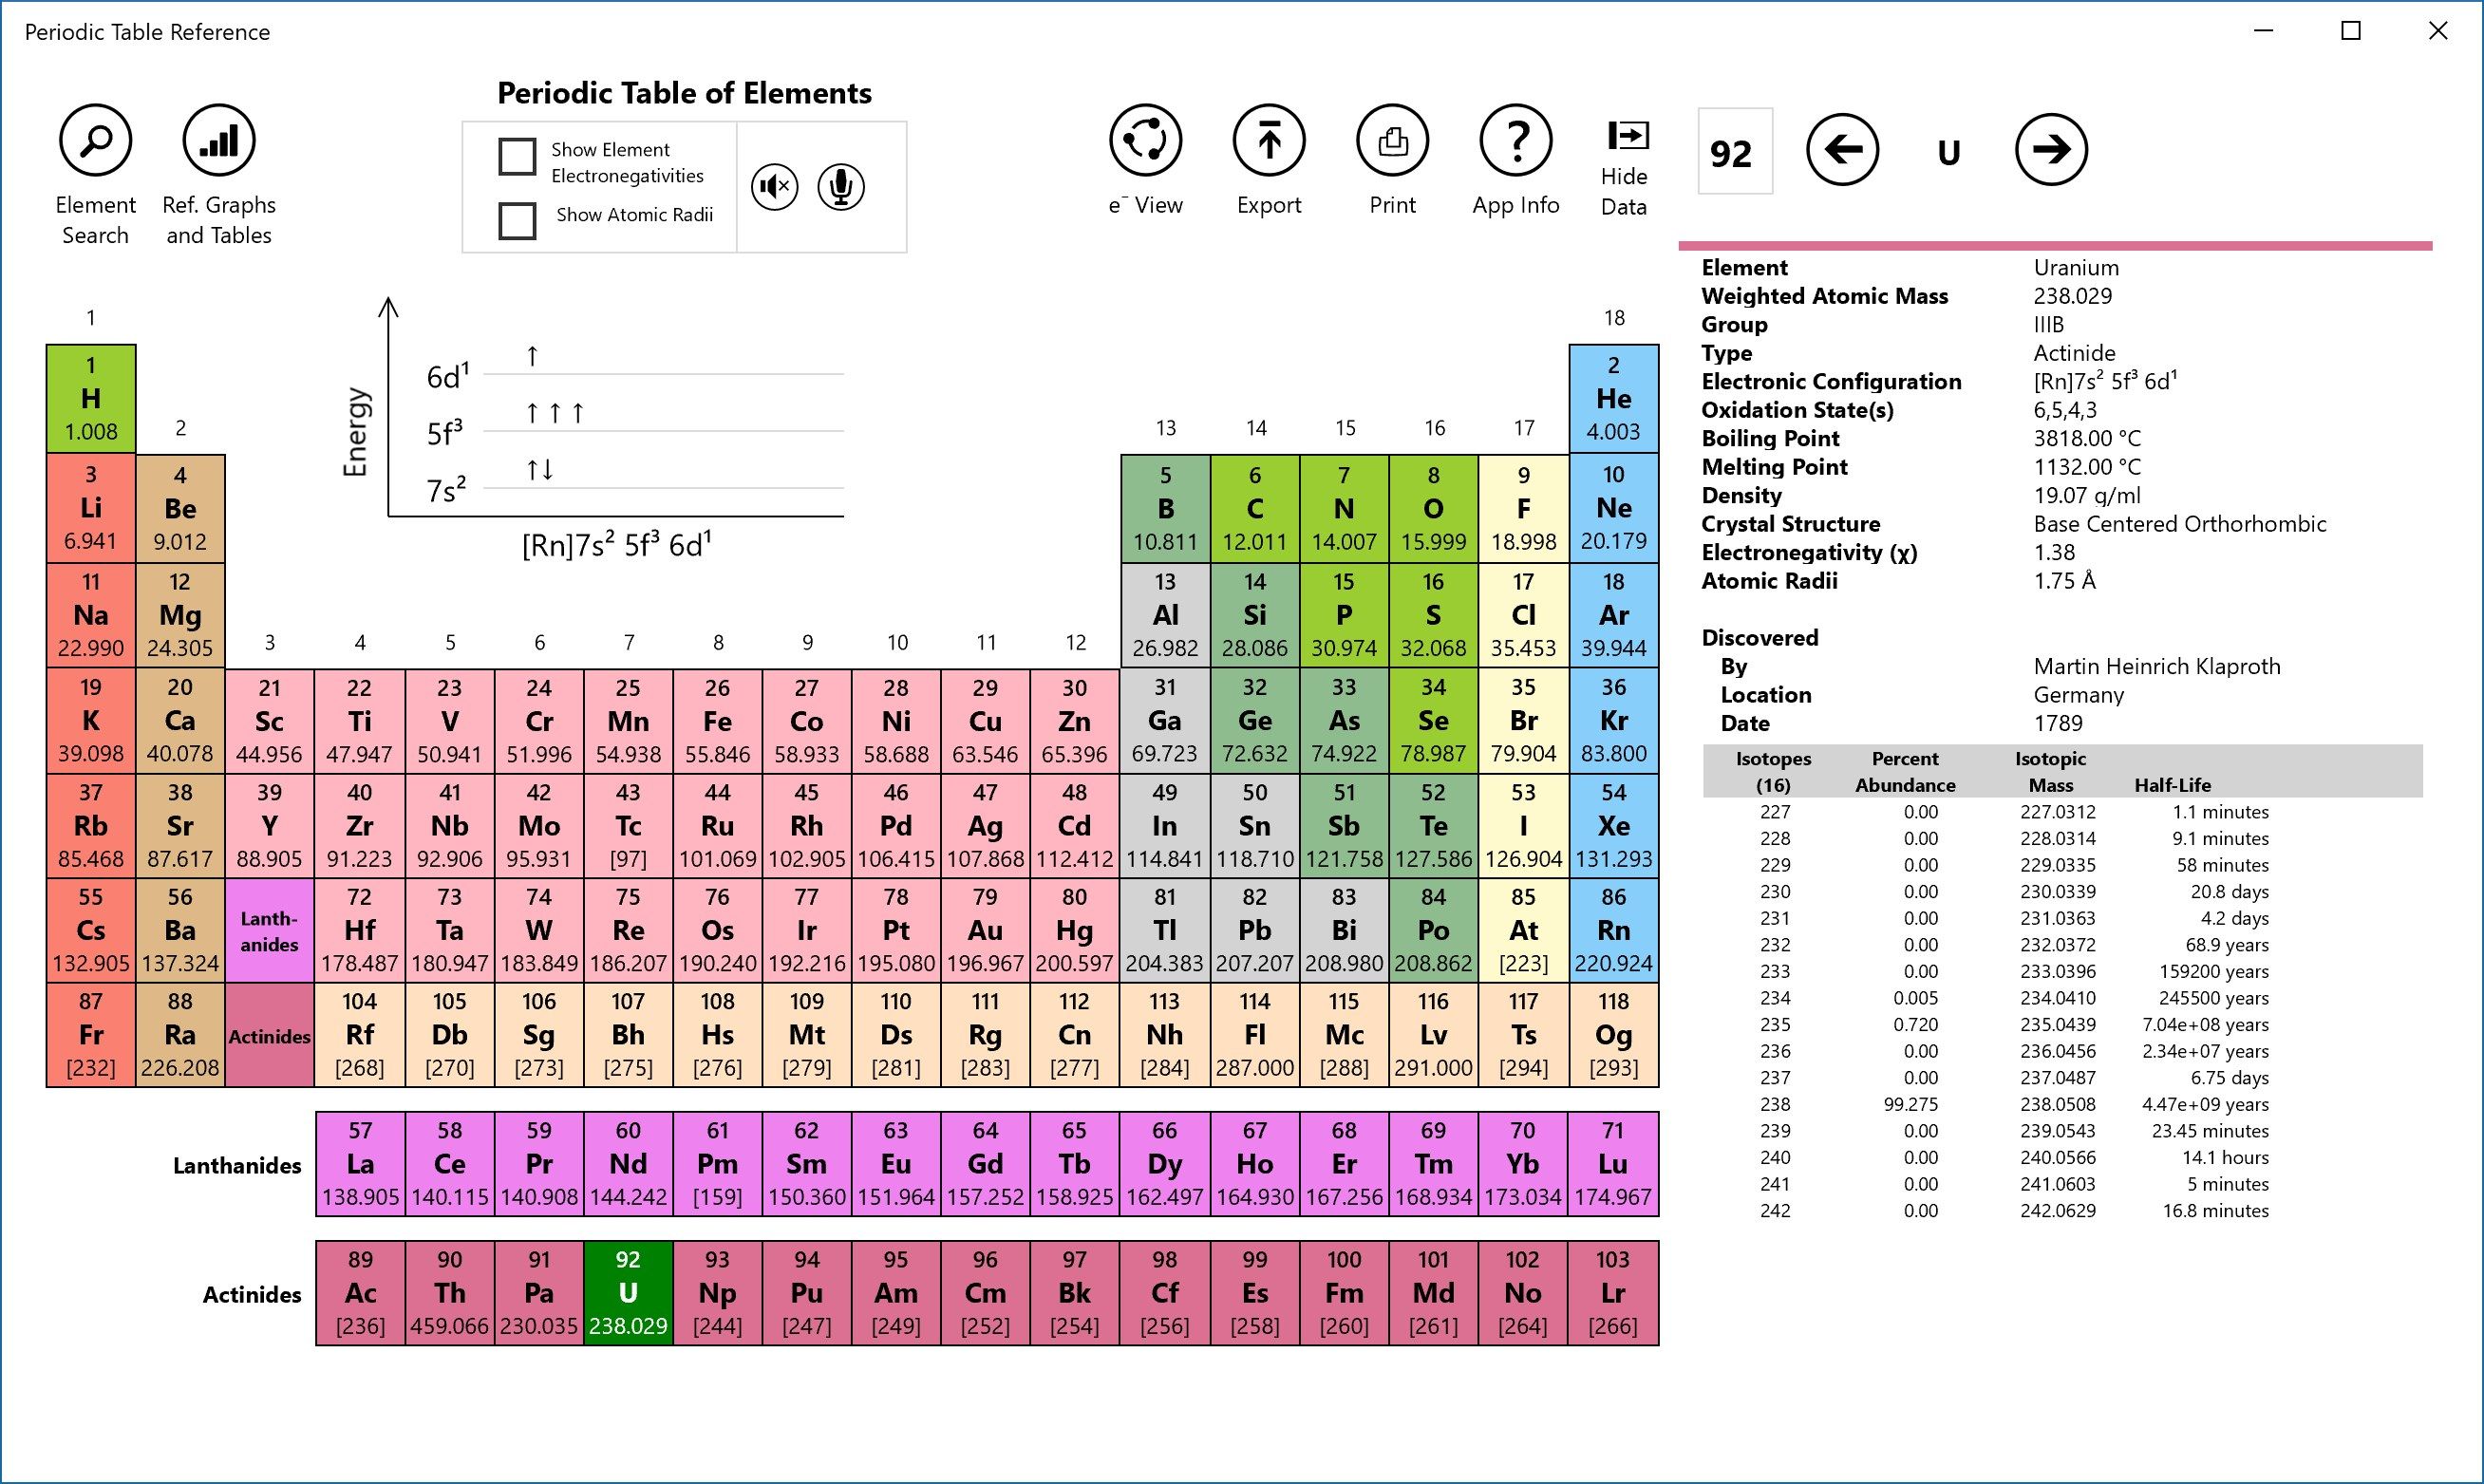 This view shows the interactive Periodic Table of Elements. Elements are selected by tapping on them and/or using the keyboard arrow keys. As an element is selected the Data View to the right is updated as is the Energy Level graph. Buttons at the top provide for an Alphabetic Search, displaying Reference Tables and a Date time line graph of element discovery. The buttons are also used to print and export the table, element lists, electronic configurations and selected element data. An option is available to show Electronegativities within each cell replacing weighted mass value.